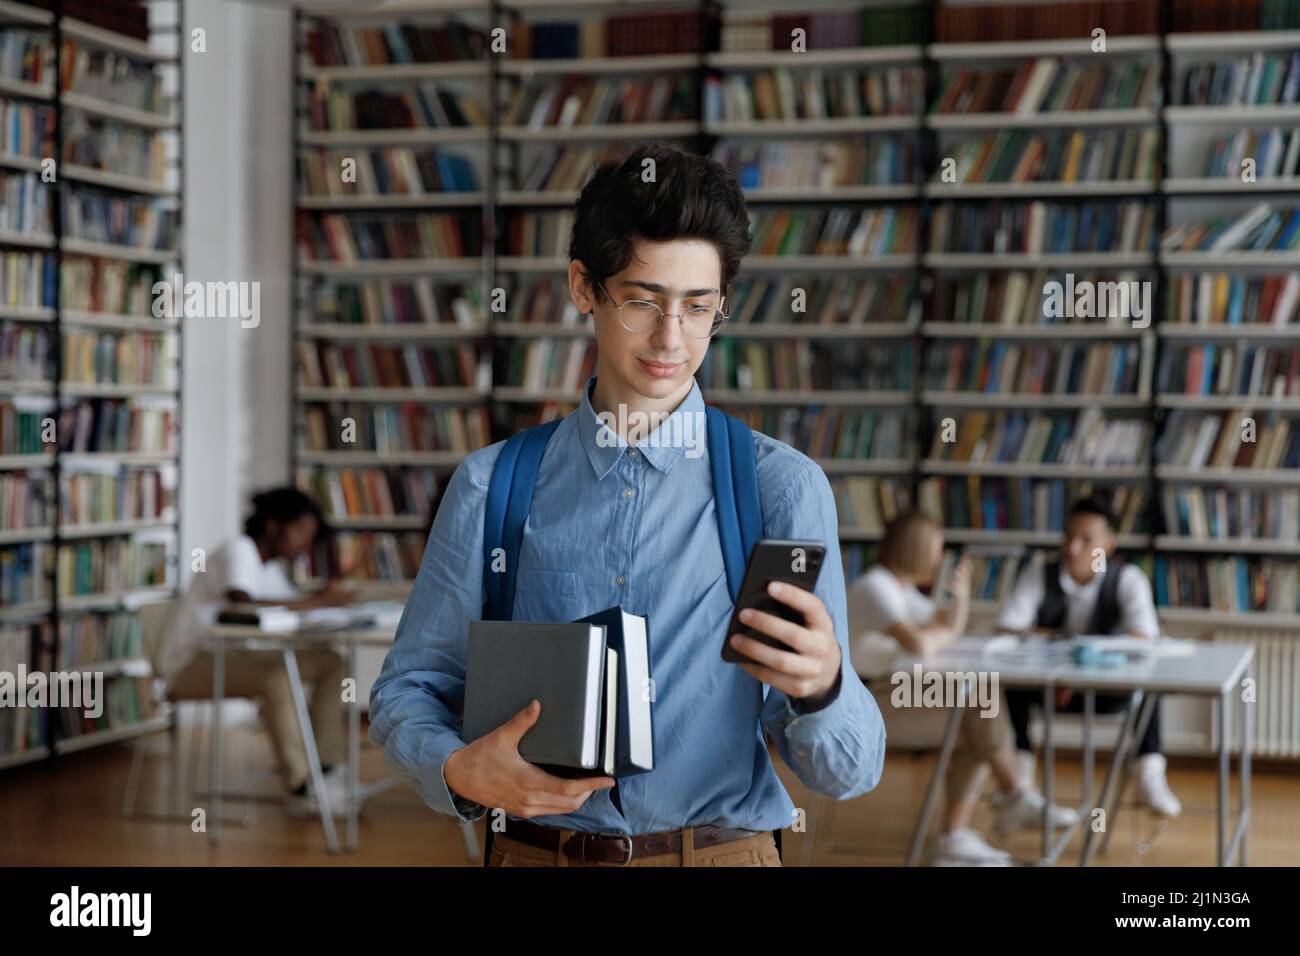 Students guy holding workbooks and smartphone standing in library Stock Photo